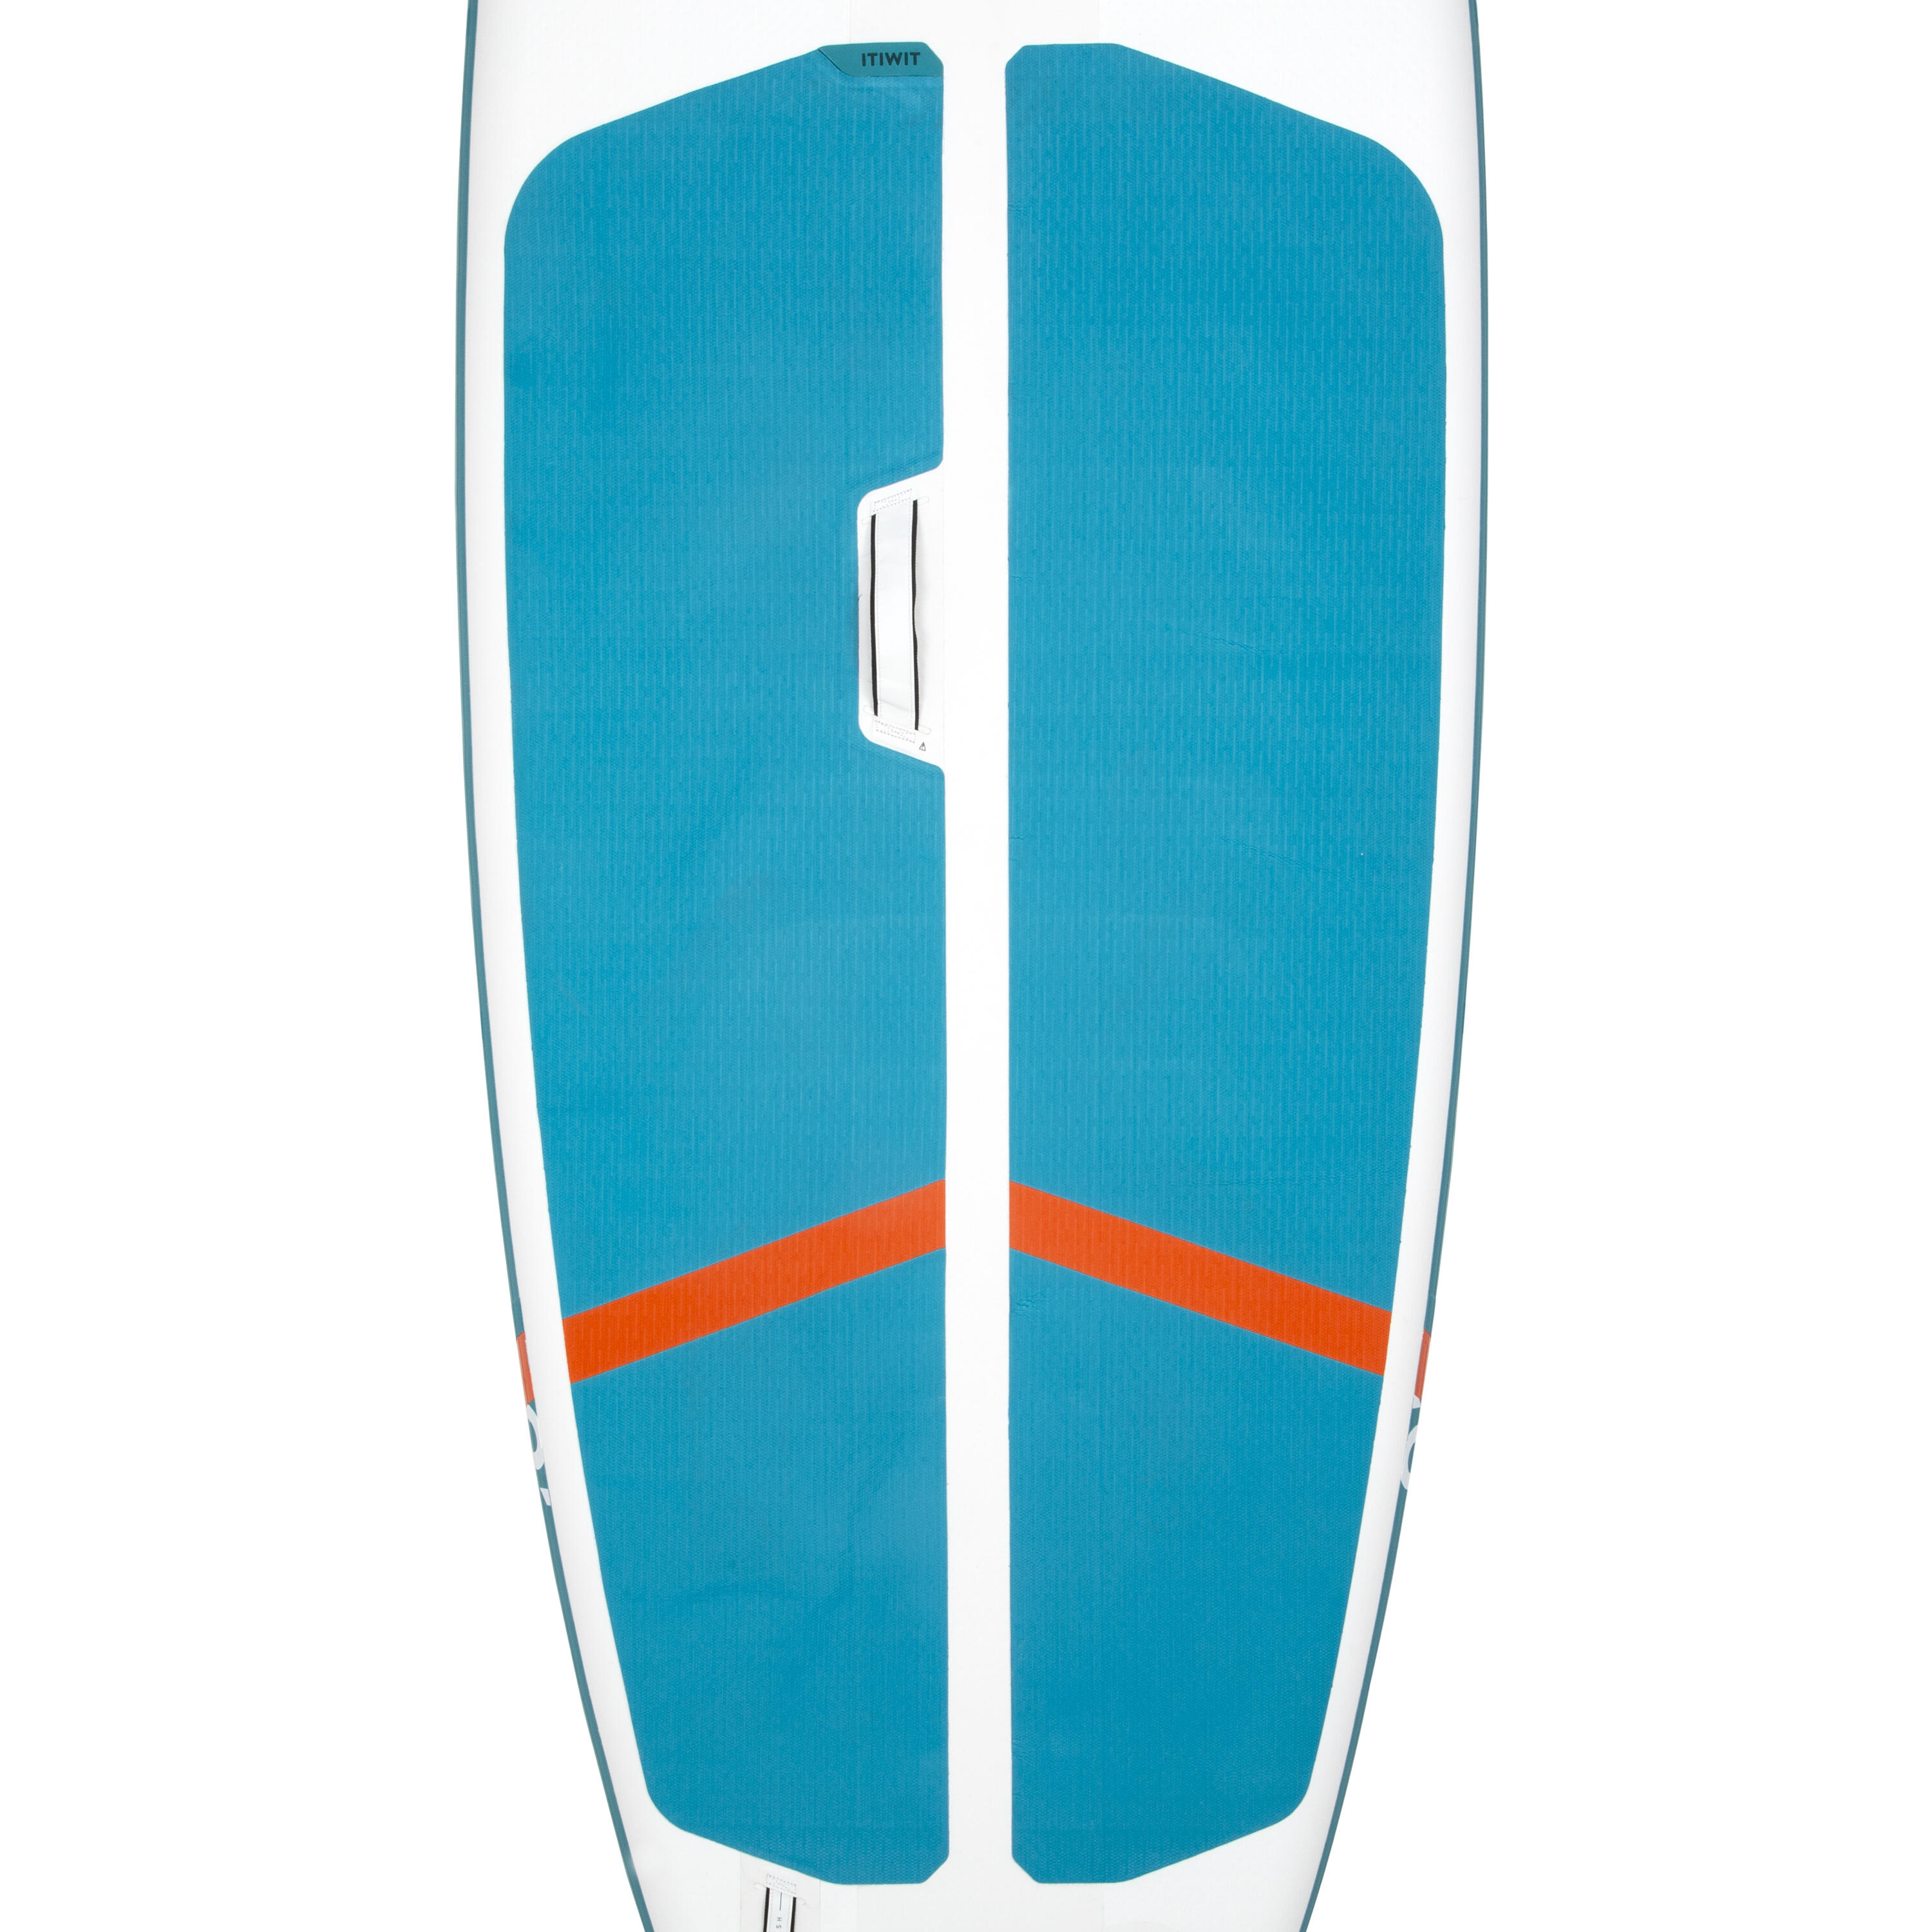 Inflatable Paddle Board - 100 White/Green - ITIWIT